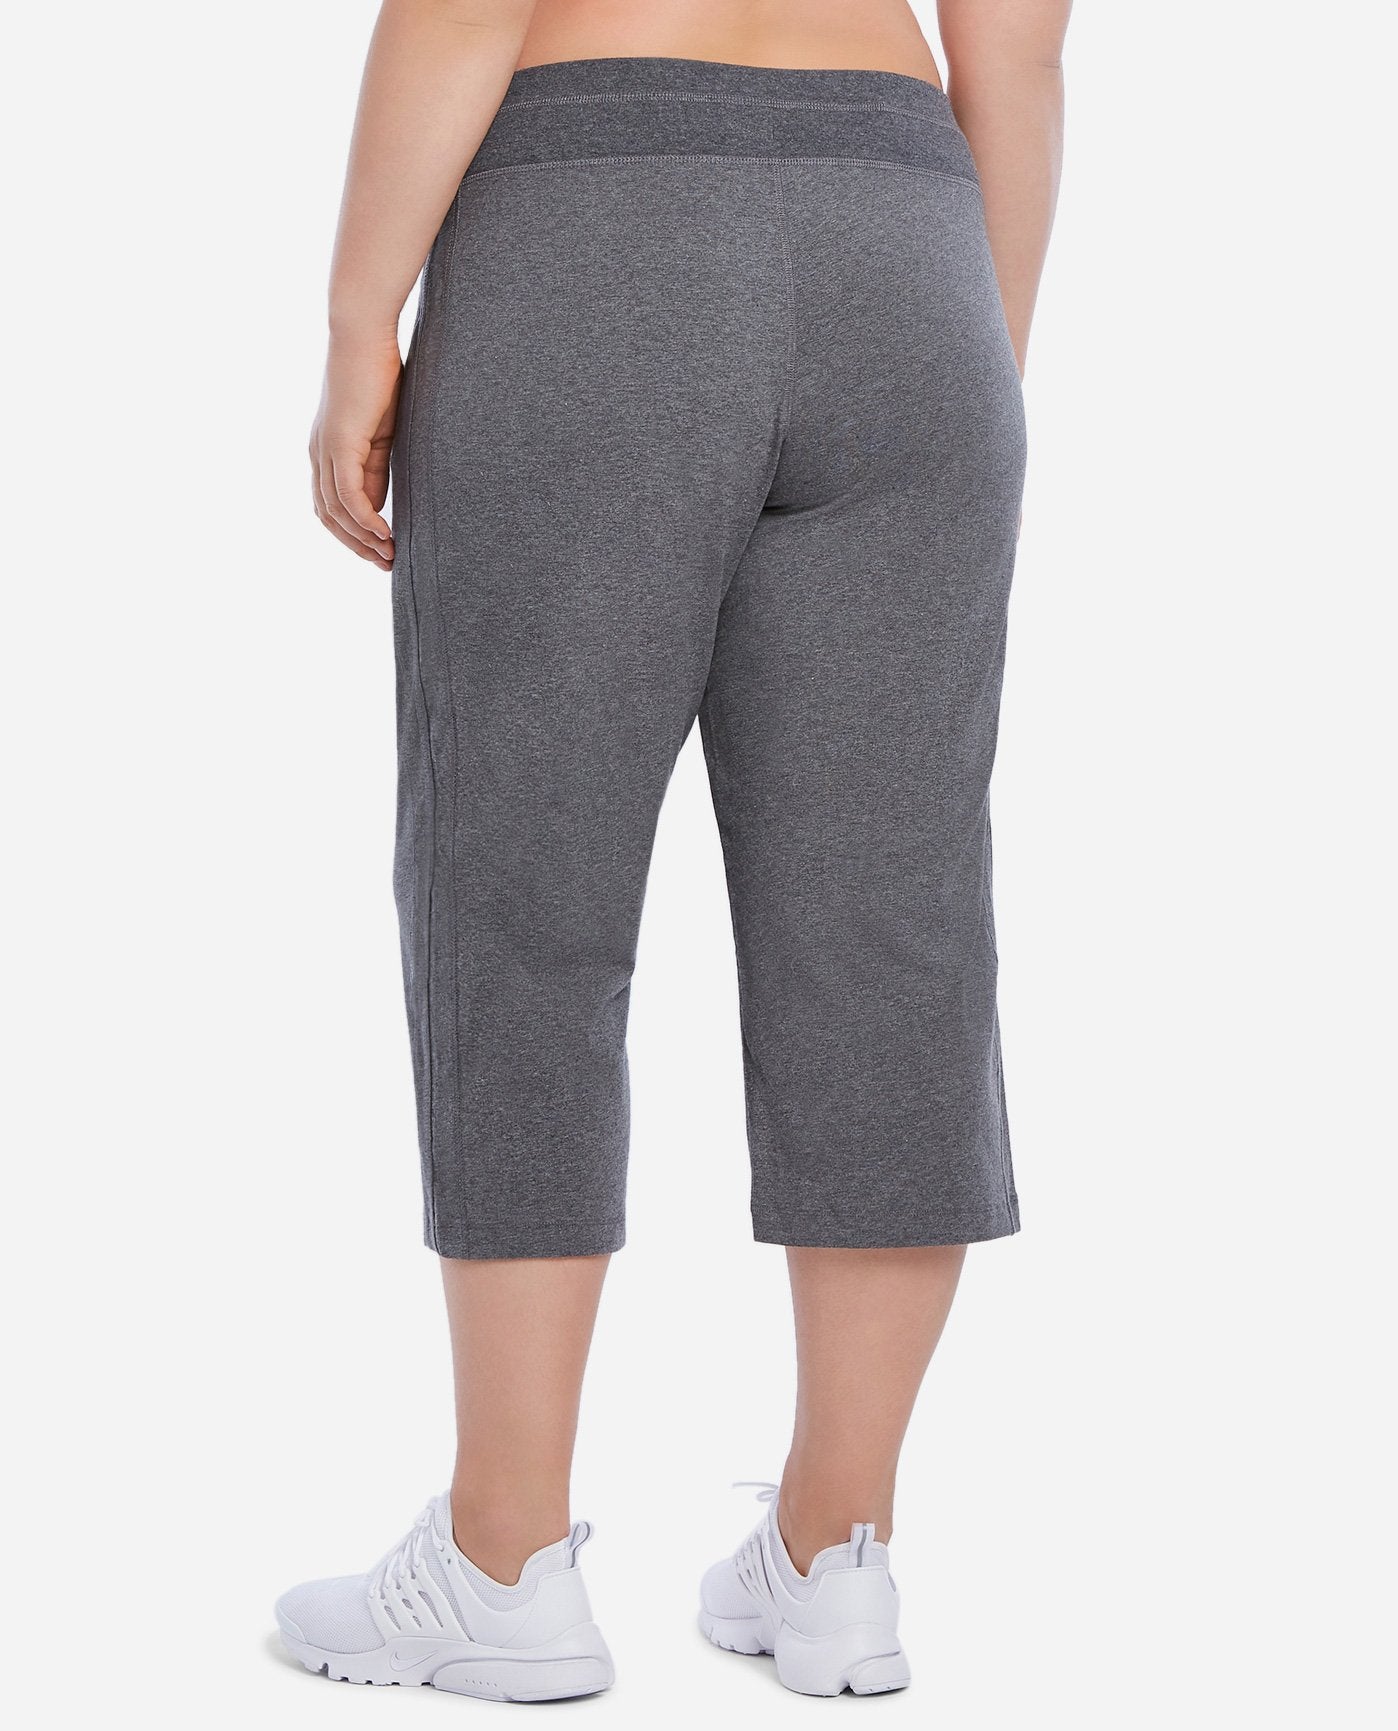 Buy HDE Plus Size Pull On Capris for Women with Pockets Elastic Waist  Cropped Pants, Charcoal, 3X at